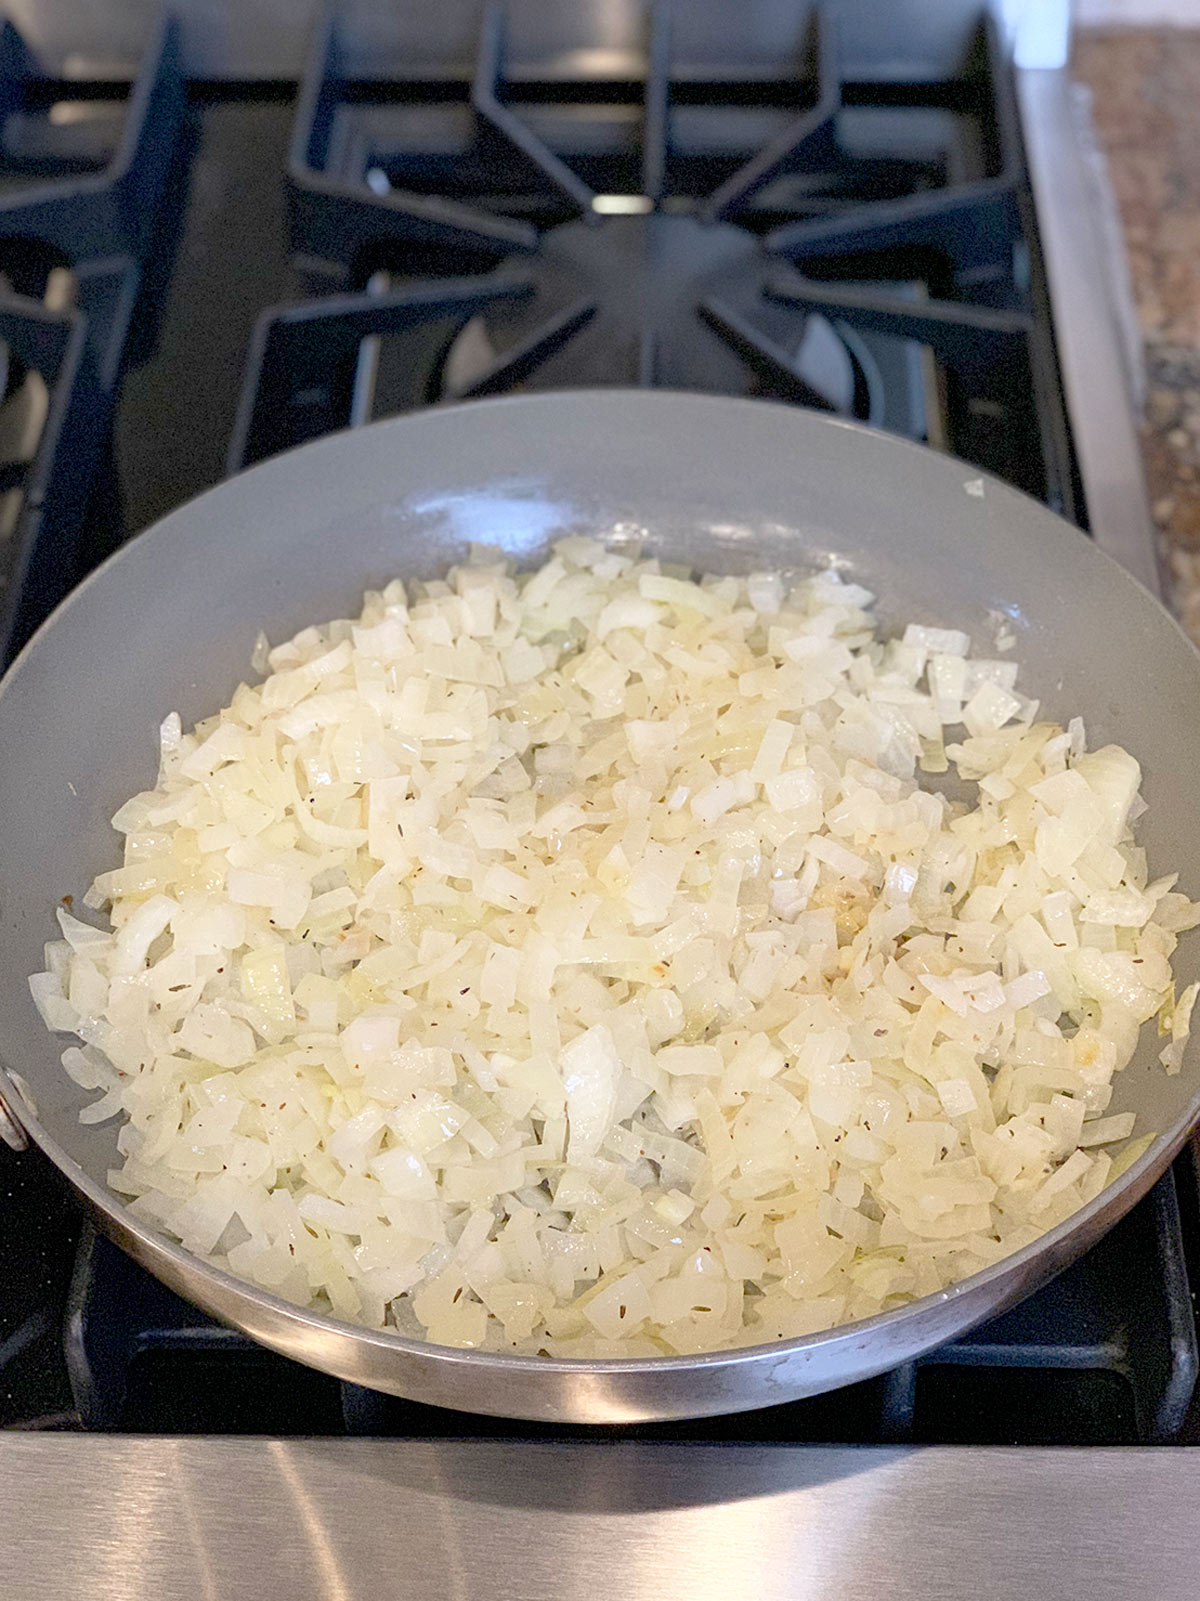 Sauteed onions in frying pan on stove top.